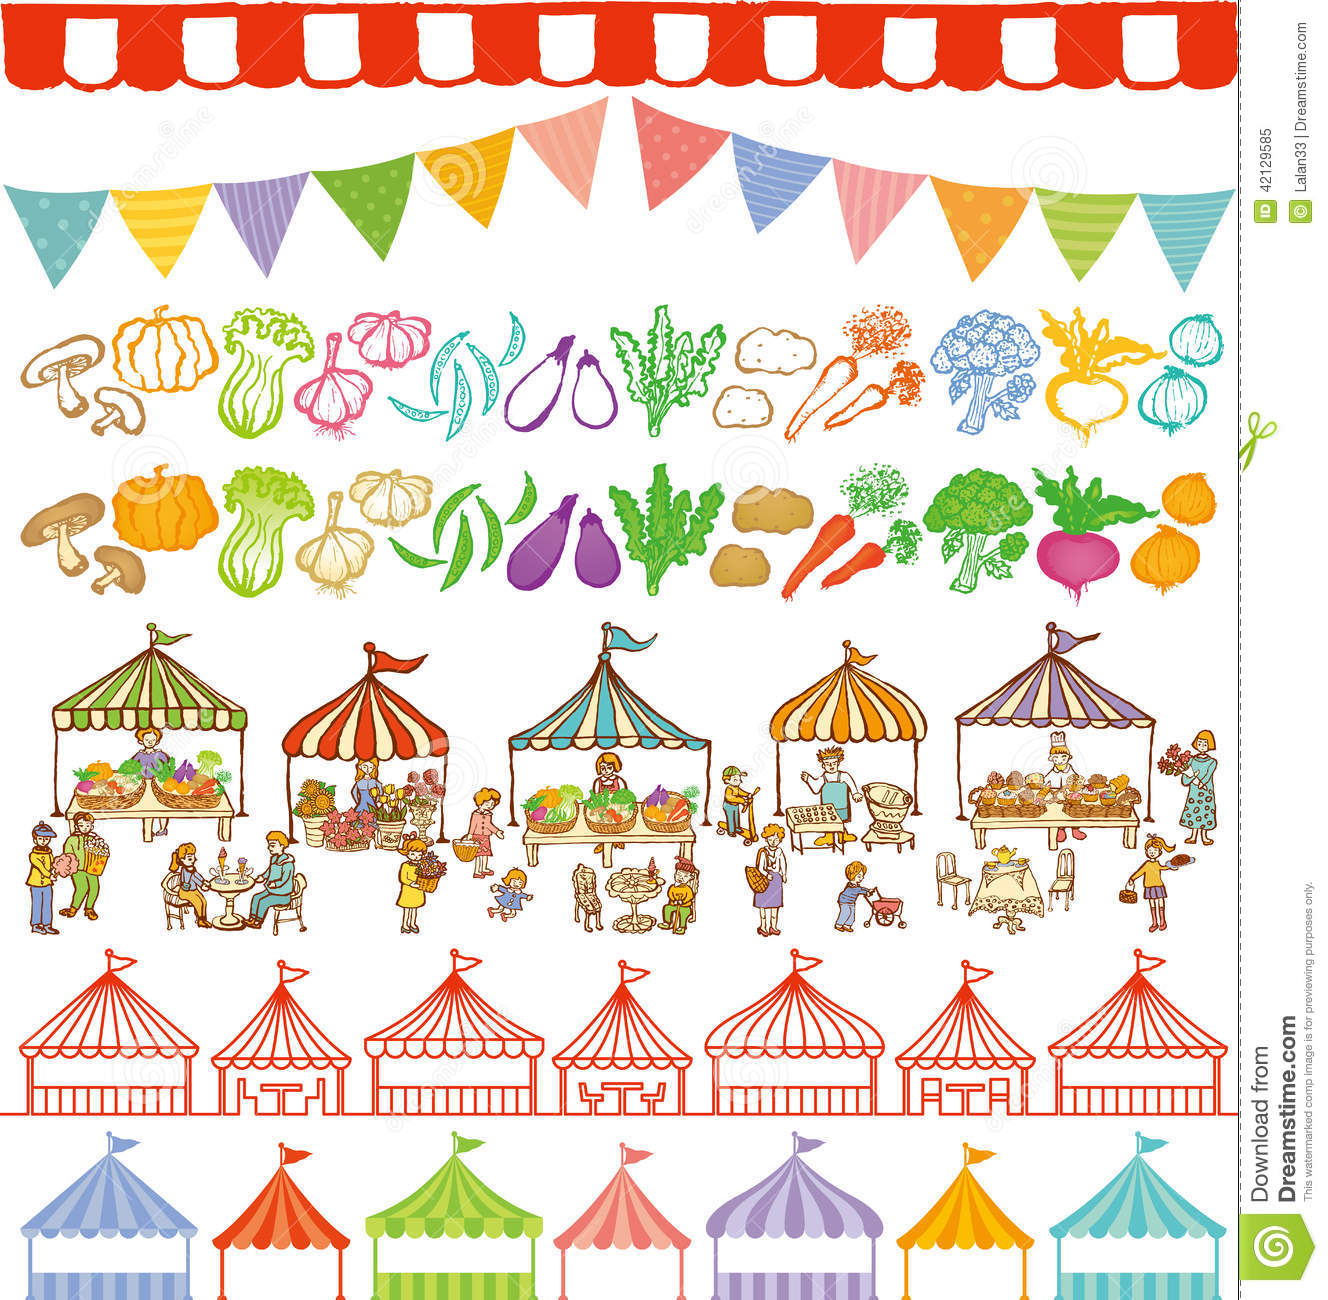 Market Place Illustrations And Event Tents Frames. Stock Vector.